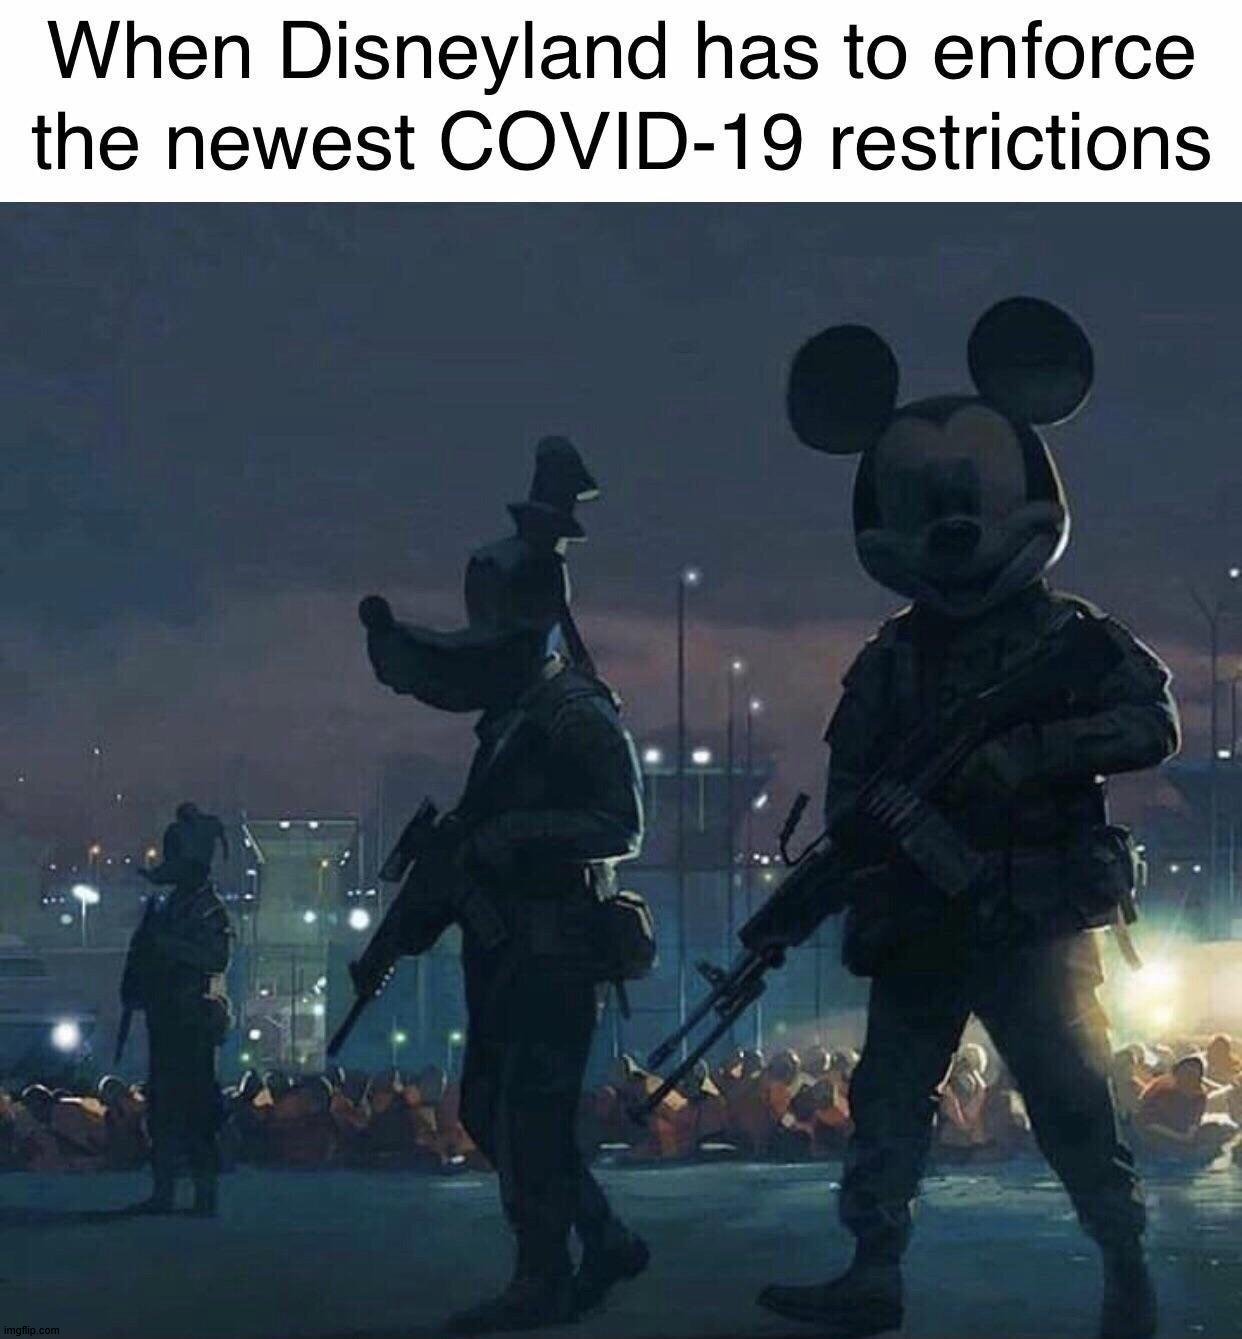 Blocked from commenting, Nazi MOD blocked me. | image tagged in covid-19,disneyland,political meme | made w/ Imgflip meme maker